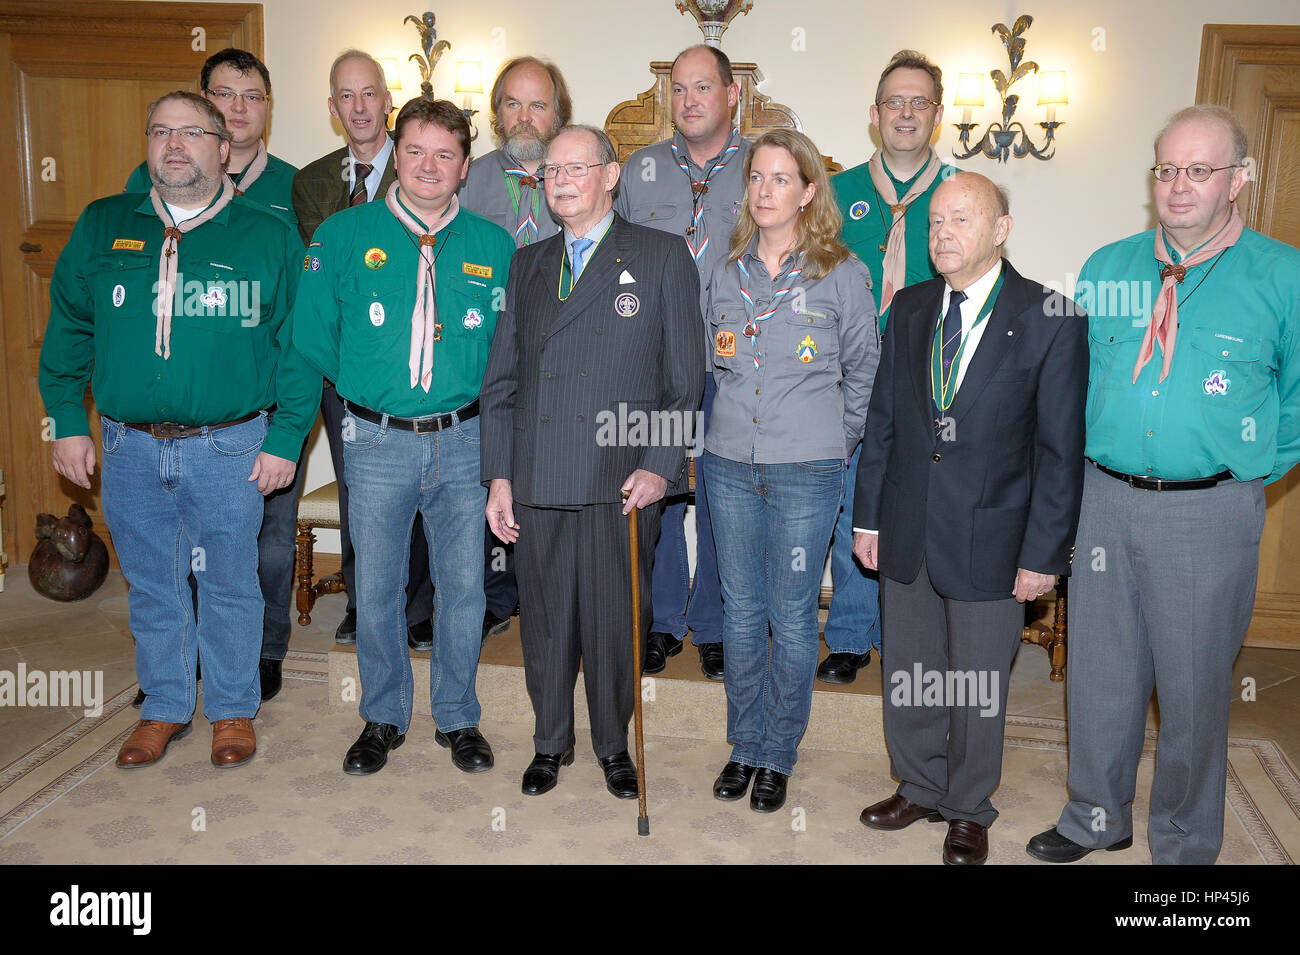 Luxembourg Grand Duke Jean (C) poses with a group of Luxembourg Boy Scouts Association after their meeting at Fischbach Castel, Luxembourg 07.10.2010 Stock Photo